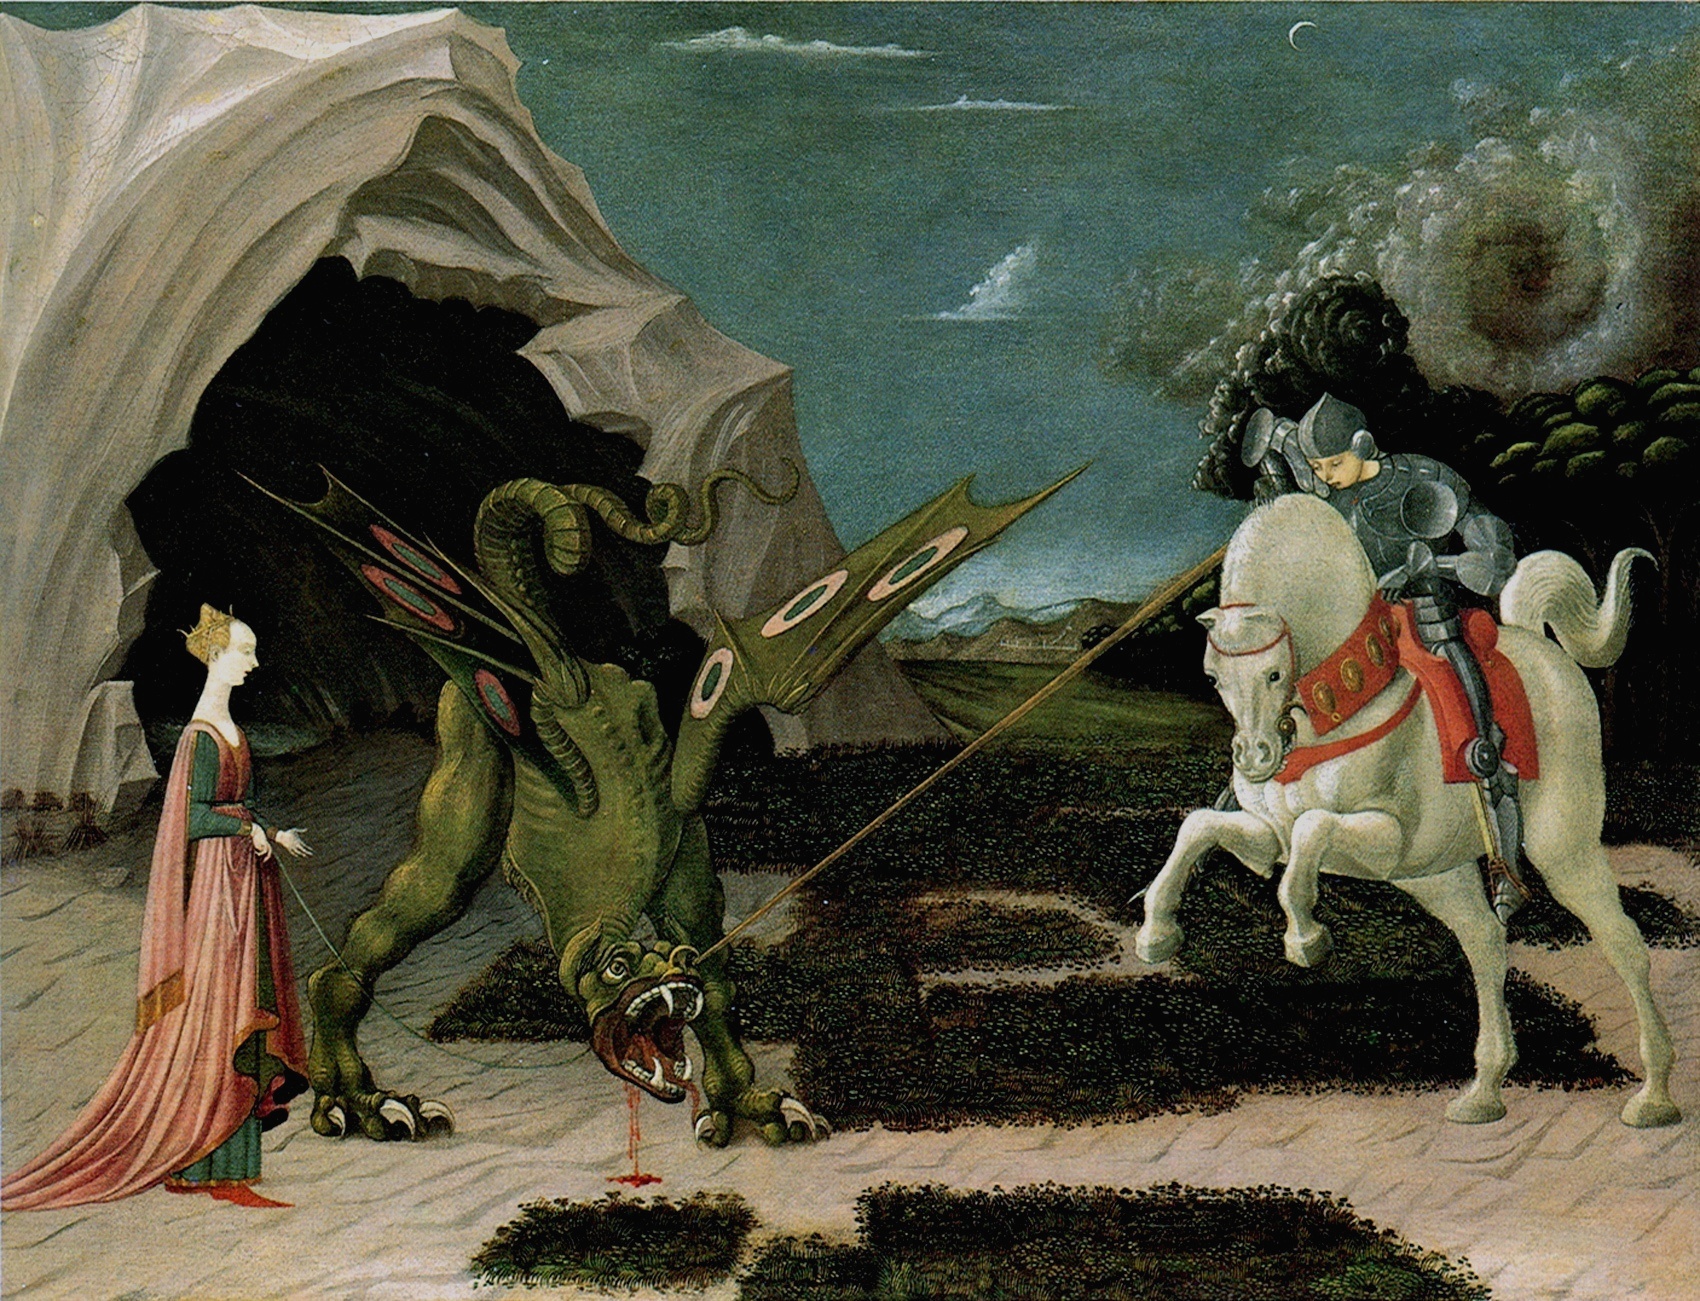 Saint George and the Dragon by Paolo Uccello - c. 1470 - 55.6 x 74.2 cm National Gallery